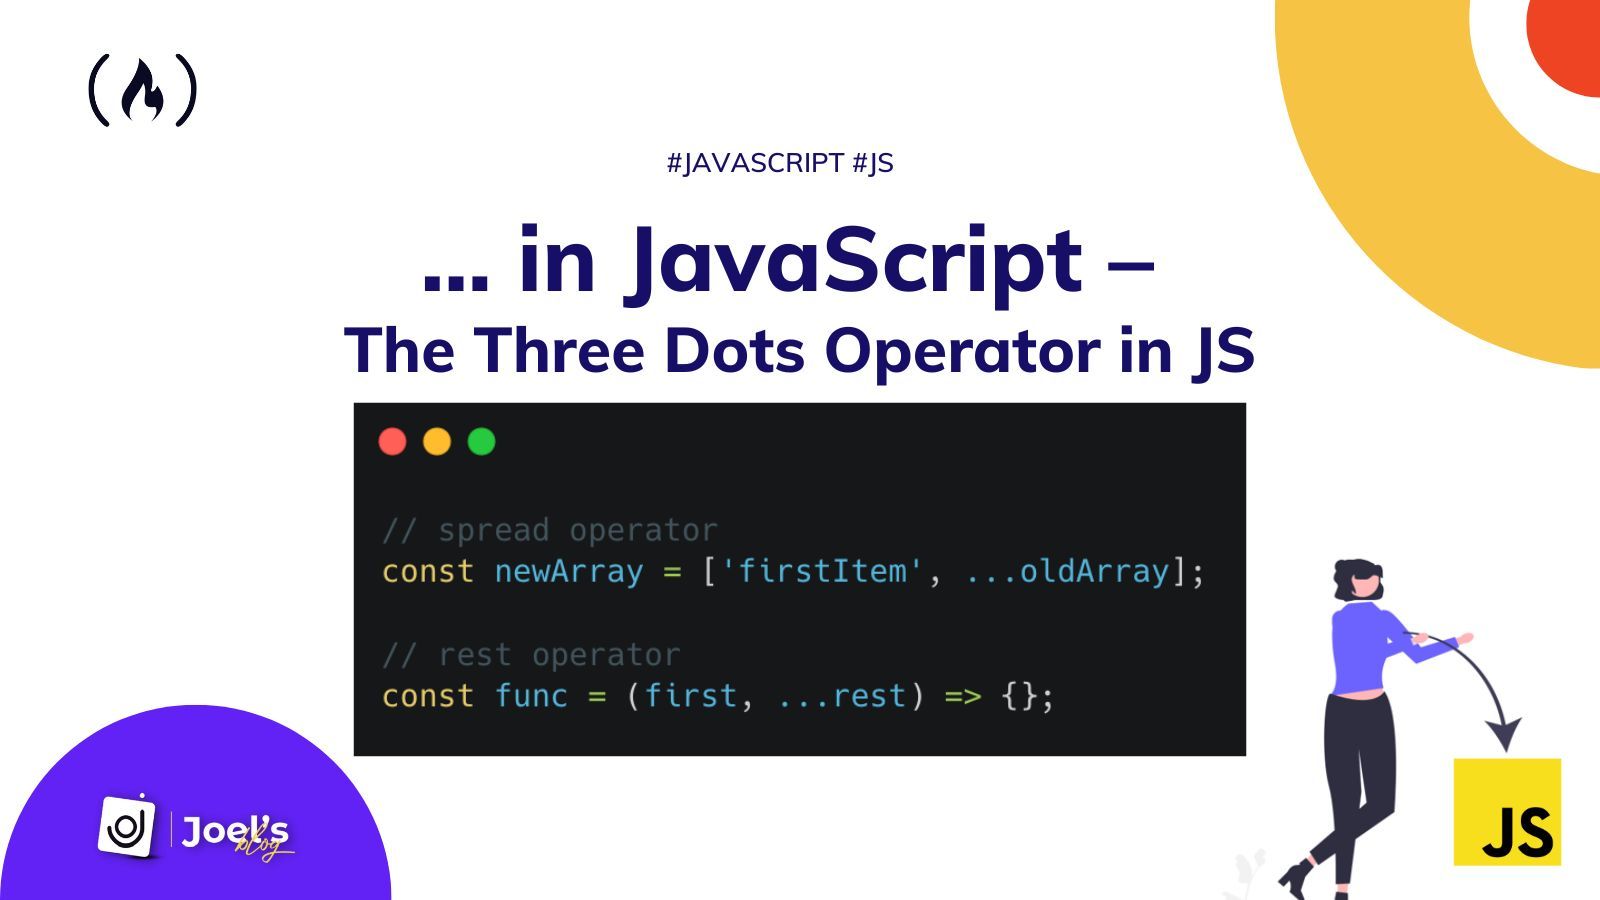 ... in JavaScript – the Three Dots Operator in JS